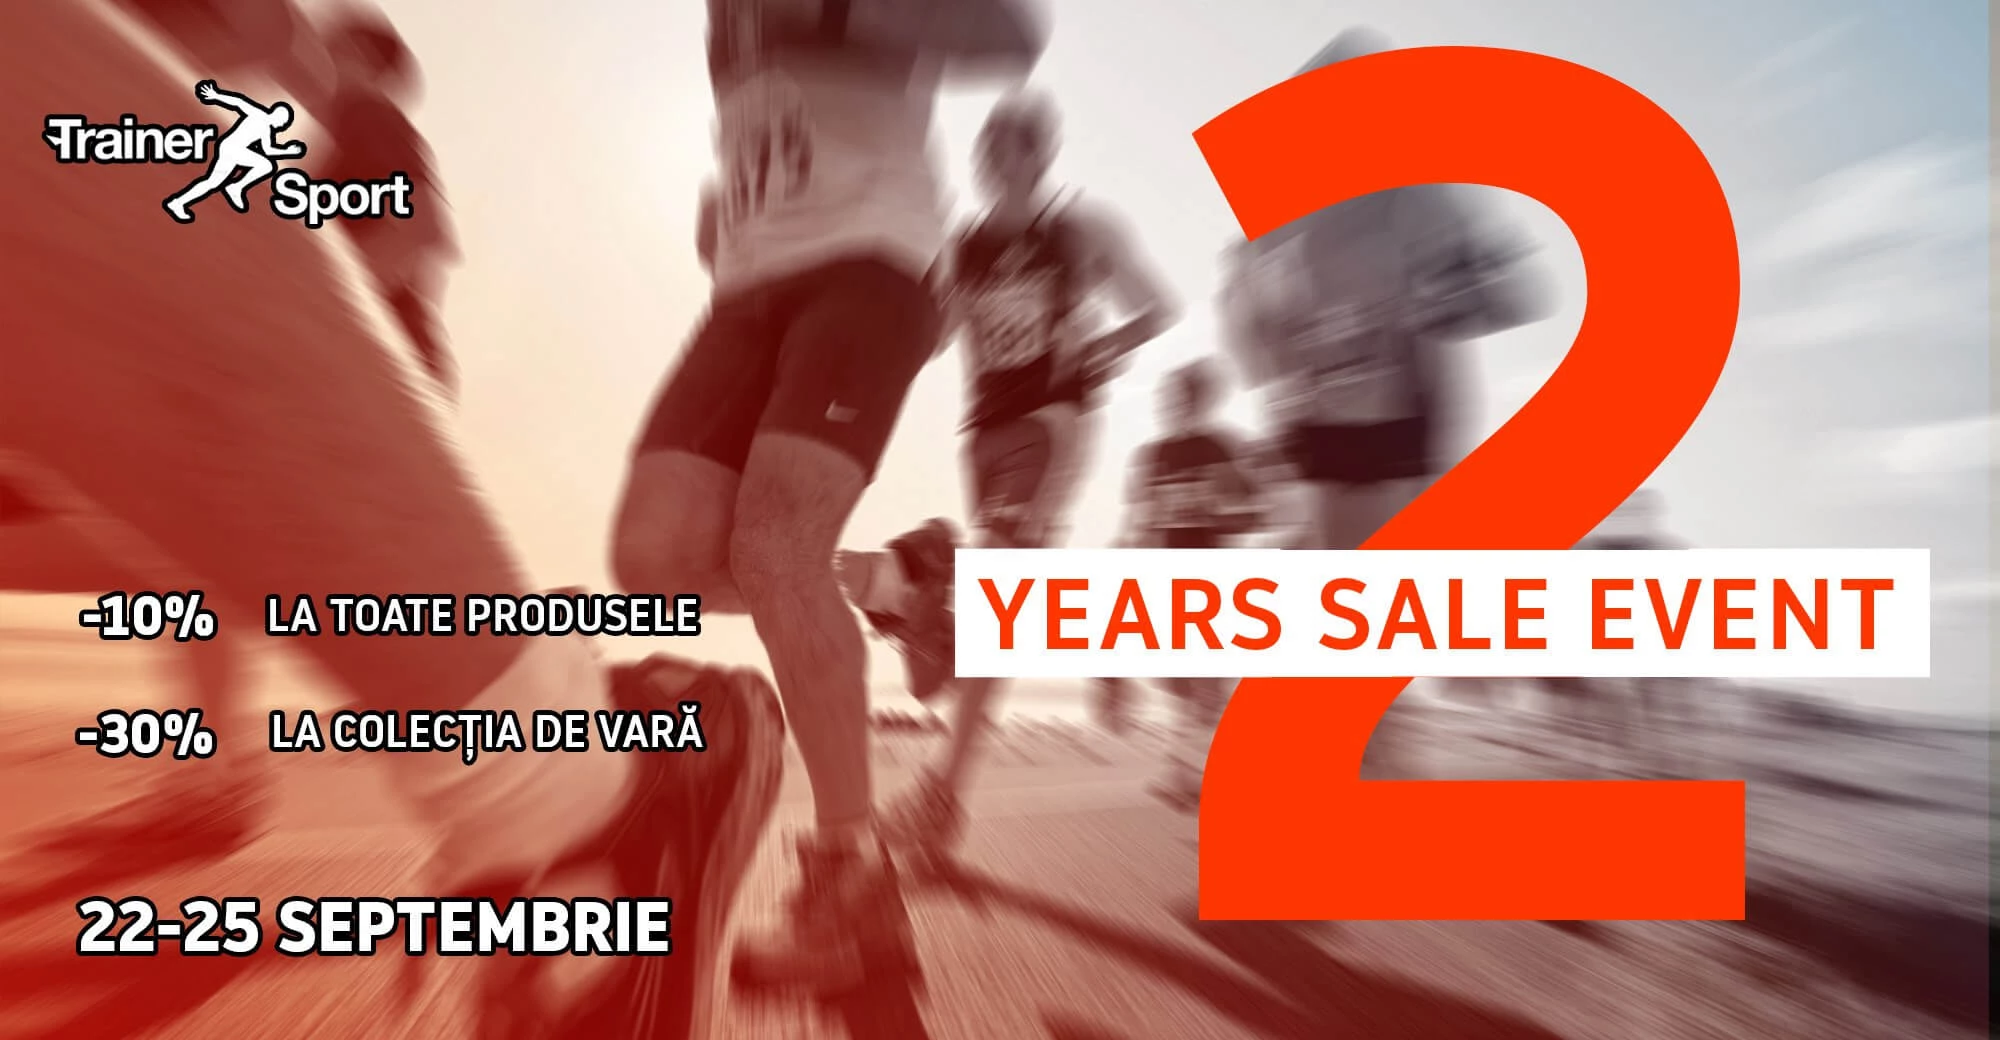 Trainer Sport 2 Years Sale Event